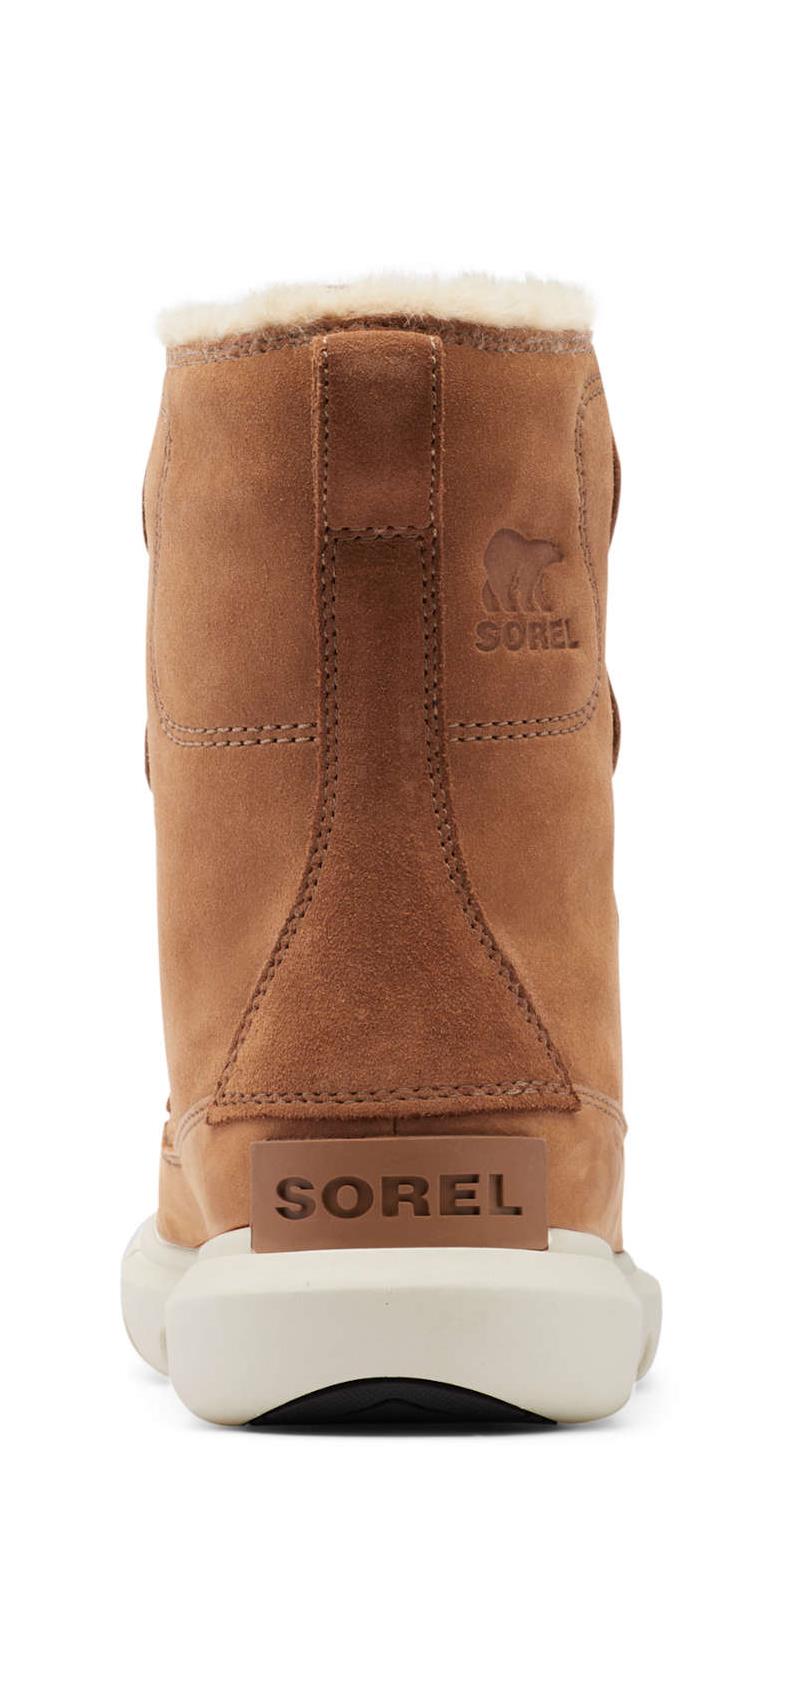 Sorel Womens Explorer II Joan Suede with Full Grain Leather Boots-3